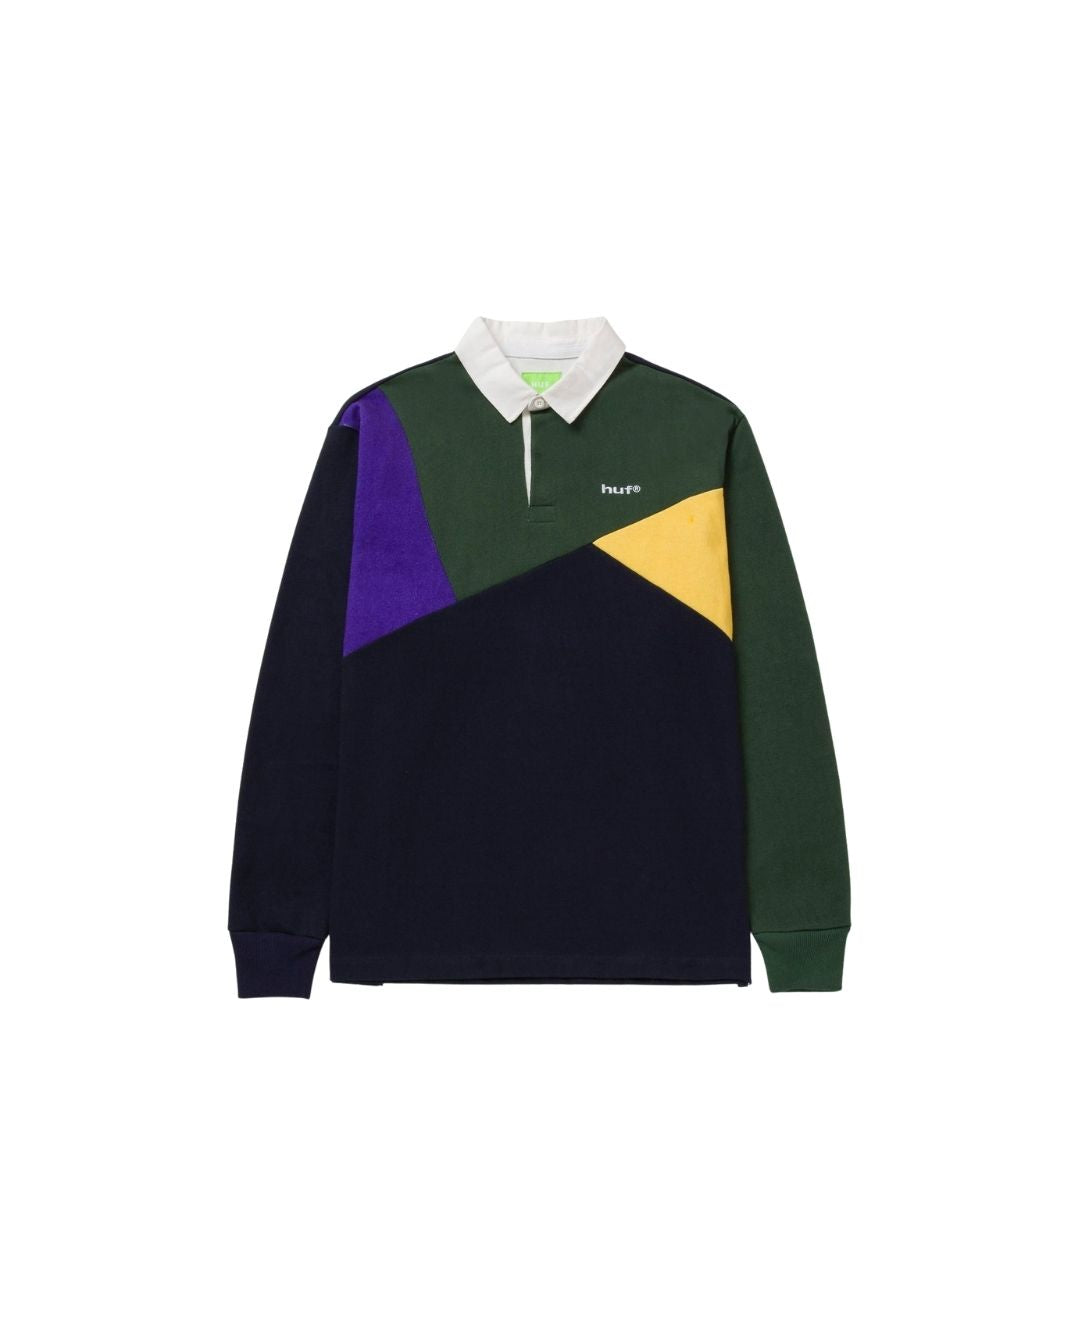 Mixed Up L/S Knit Polo